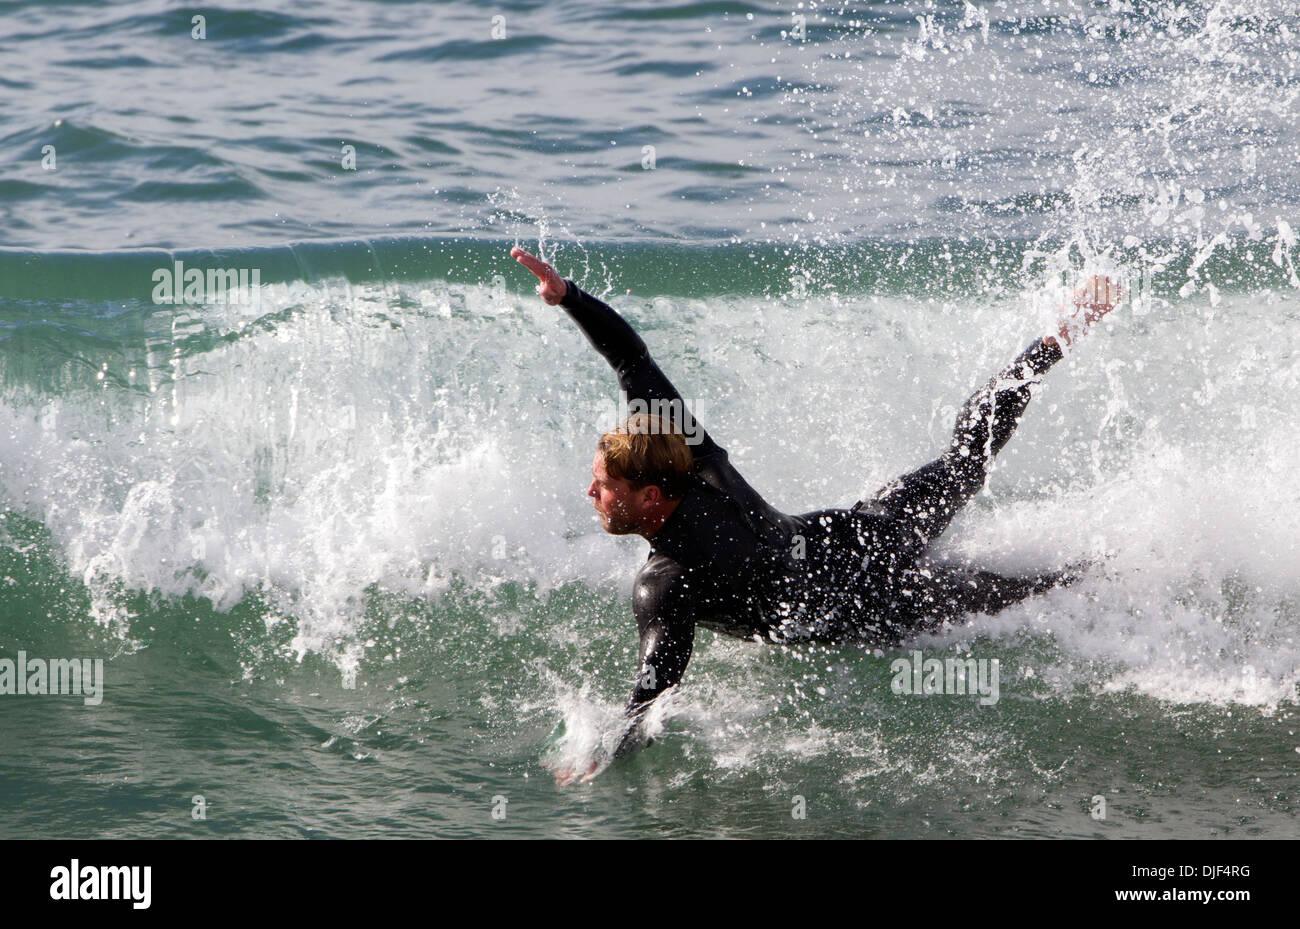 Surfer Wipe Out Stock Photo